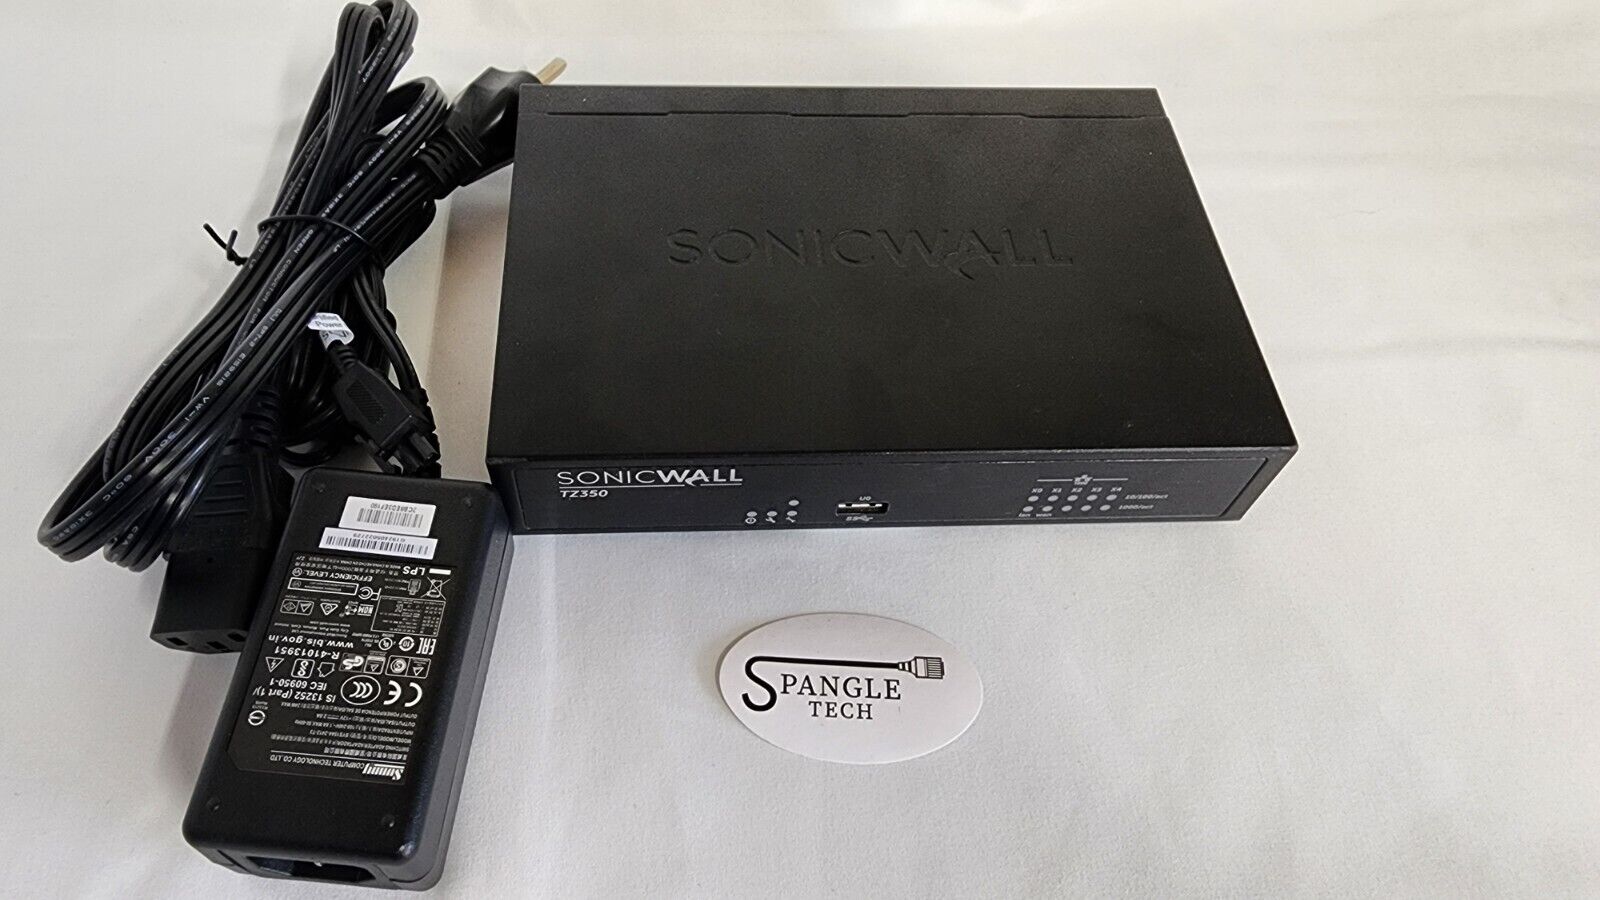 SONICWALL TZ350 NETWORK SECURITY FIREWALL with Cables Used- Tested and Reset